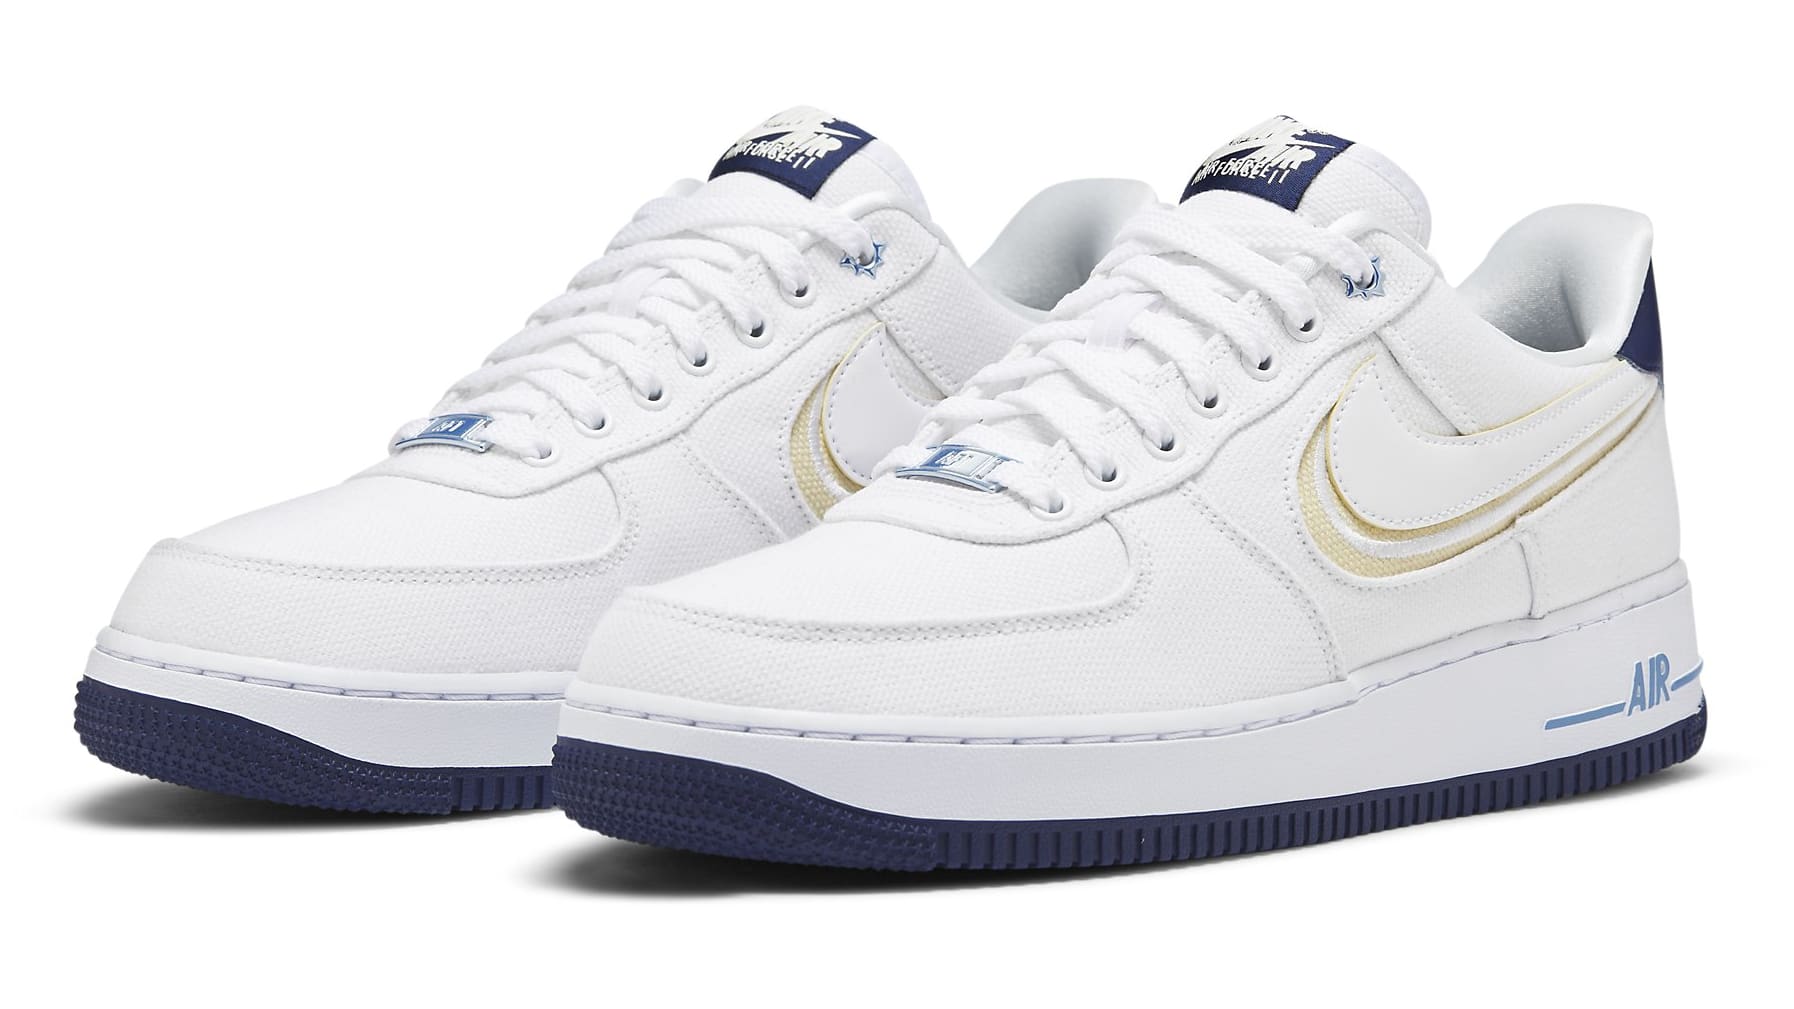 Nike Moment 37 Street Fighter Air Force 1 DB3541-100